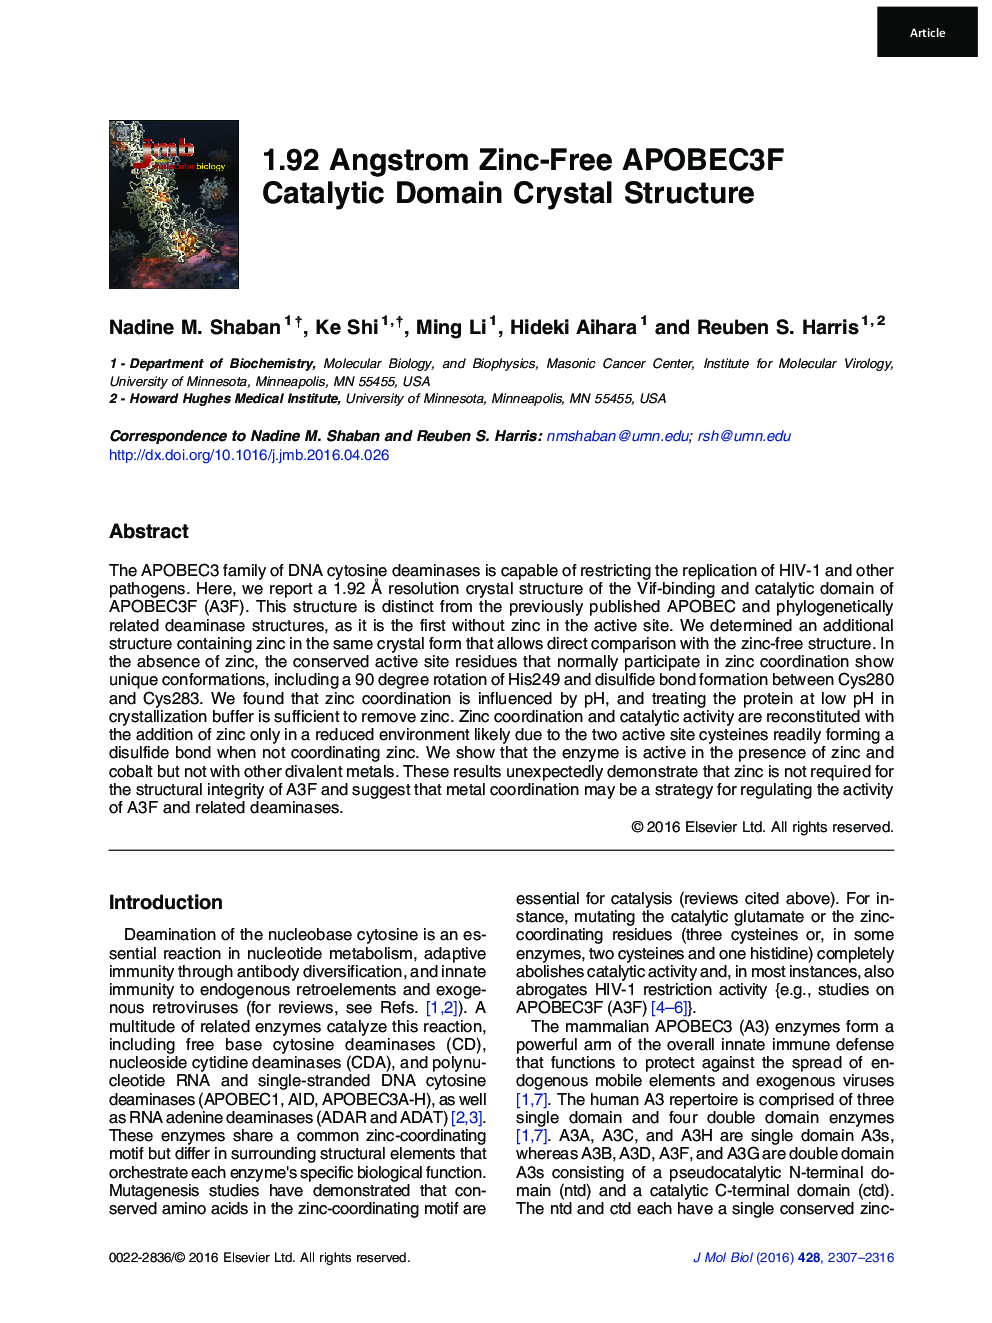 1.92 Angstrom Zinc-Free APOBEC3F Catalytic Domain Crystal Structure